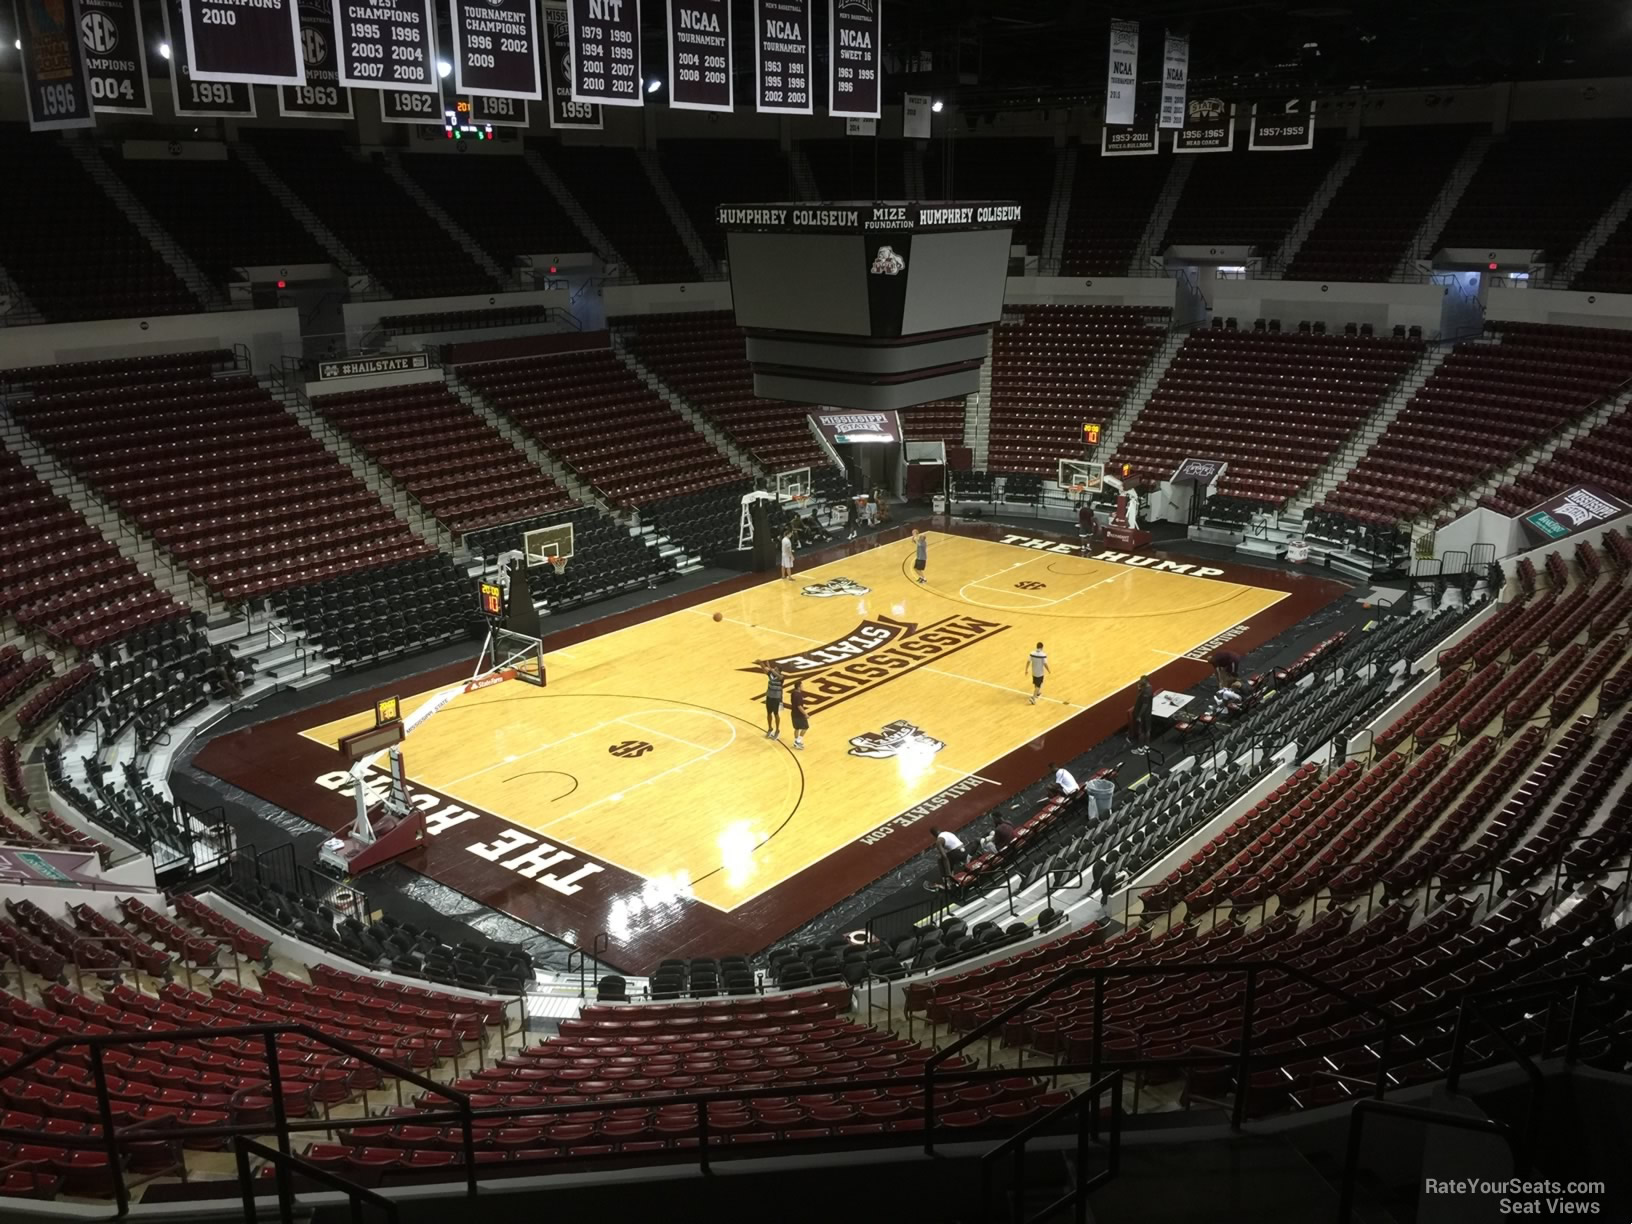 section 233, row 8 seat view  - humphrey coliseum